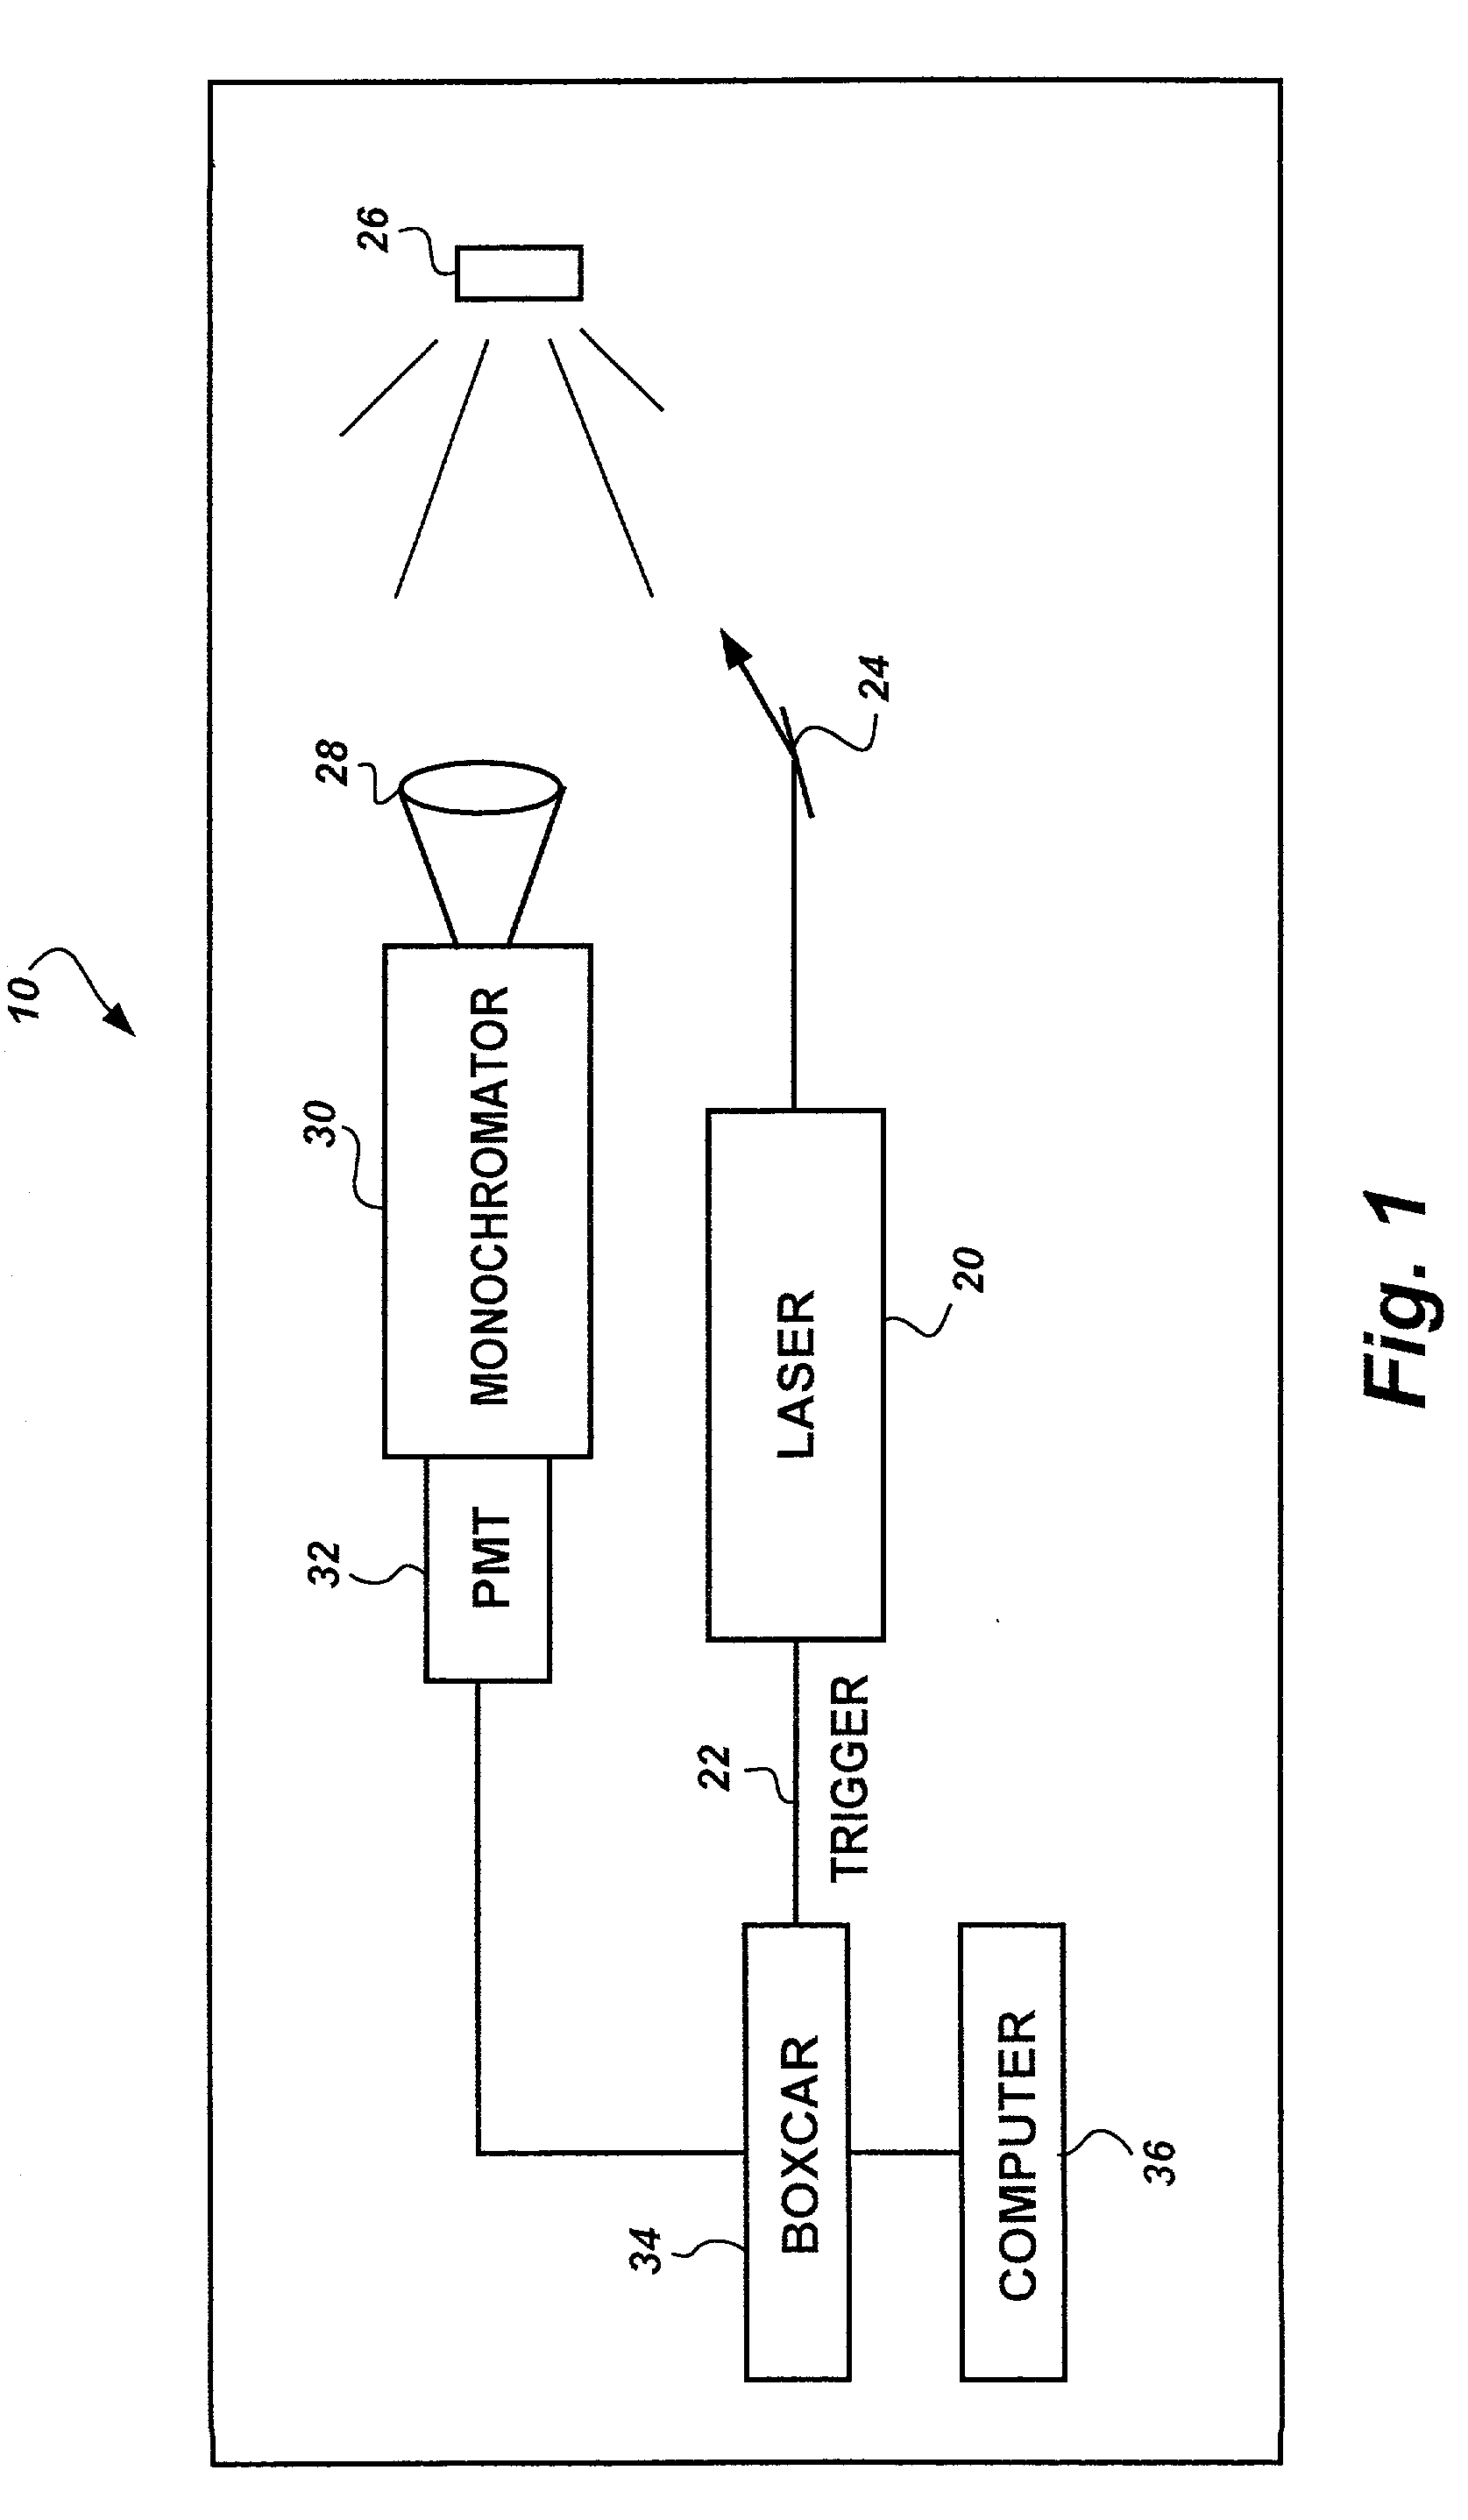 Method for characterization of petroleum oils using normalized time-resolved fluorescence spectra